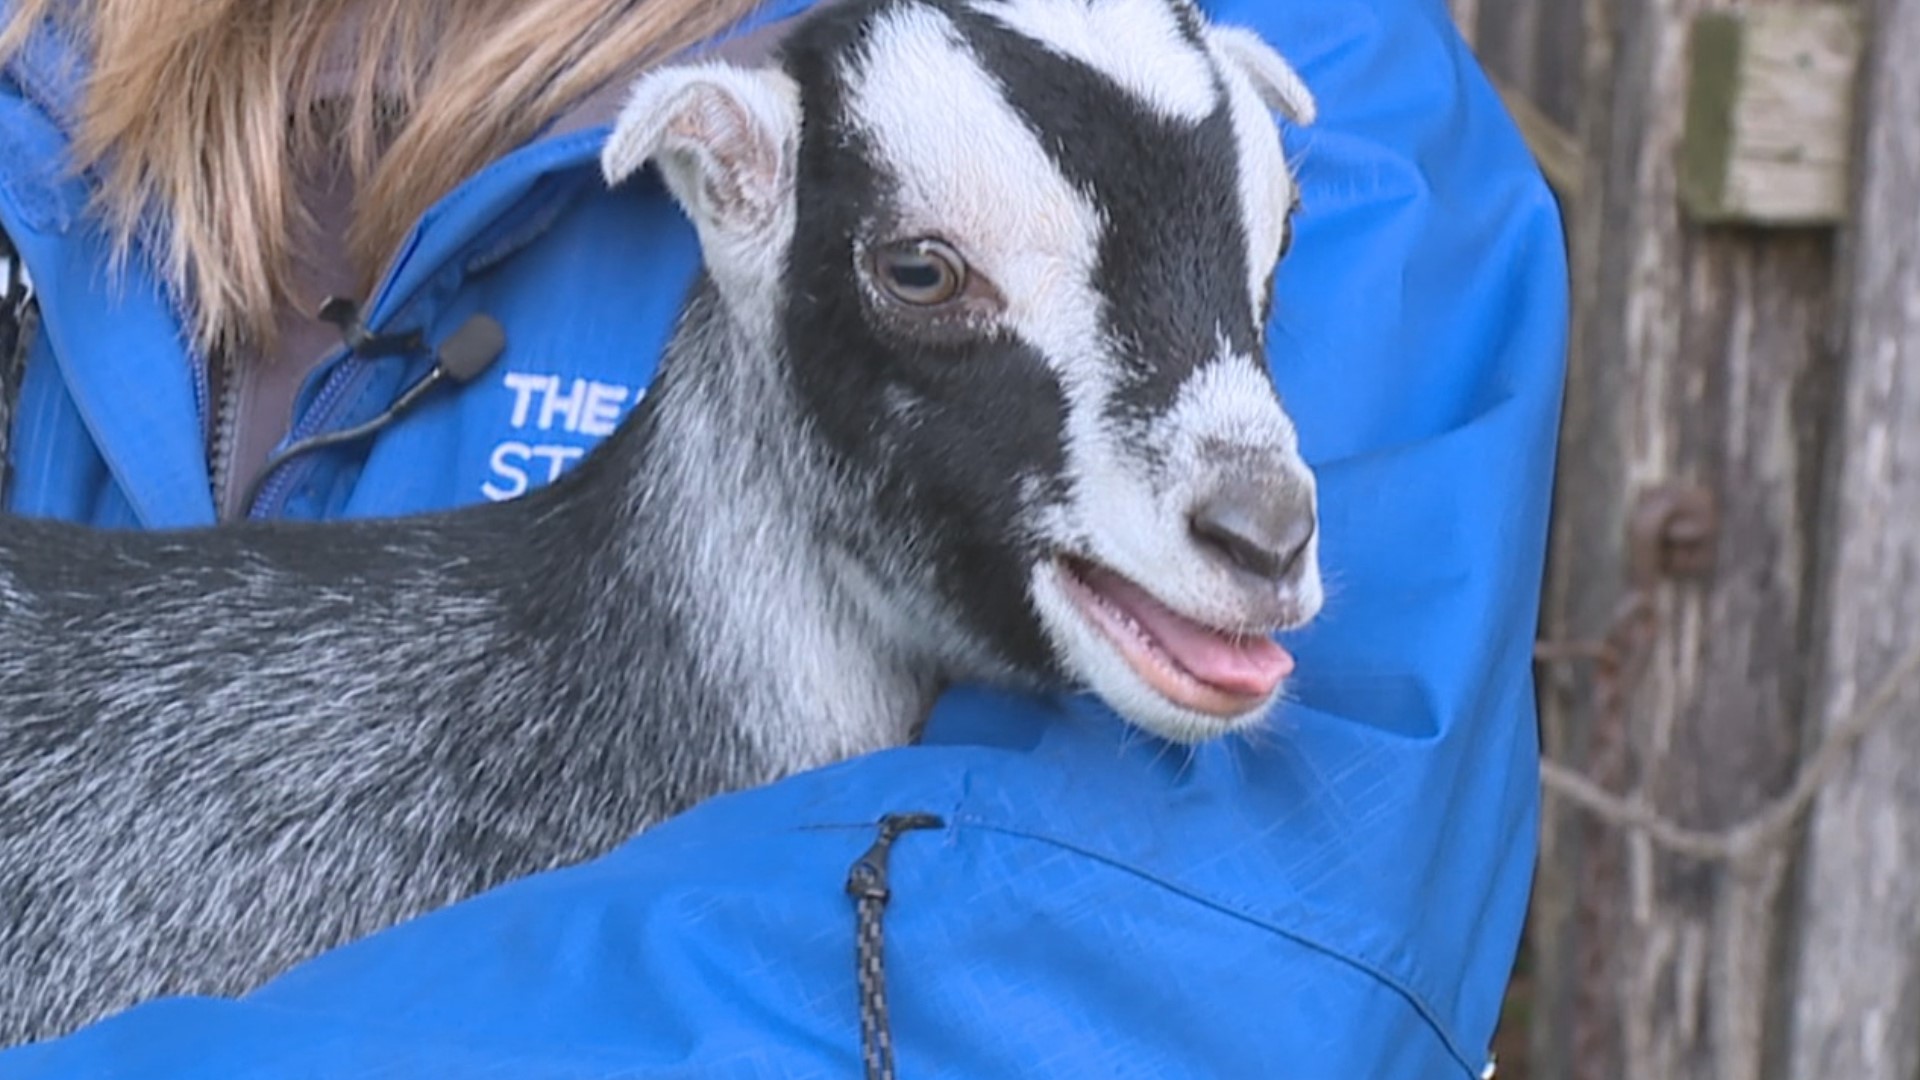 Get up close & personal with farm animals at frolic in Monroe Co. 